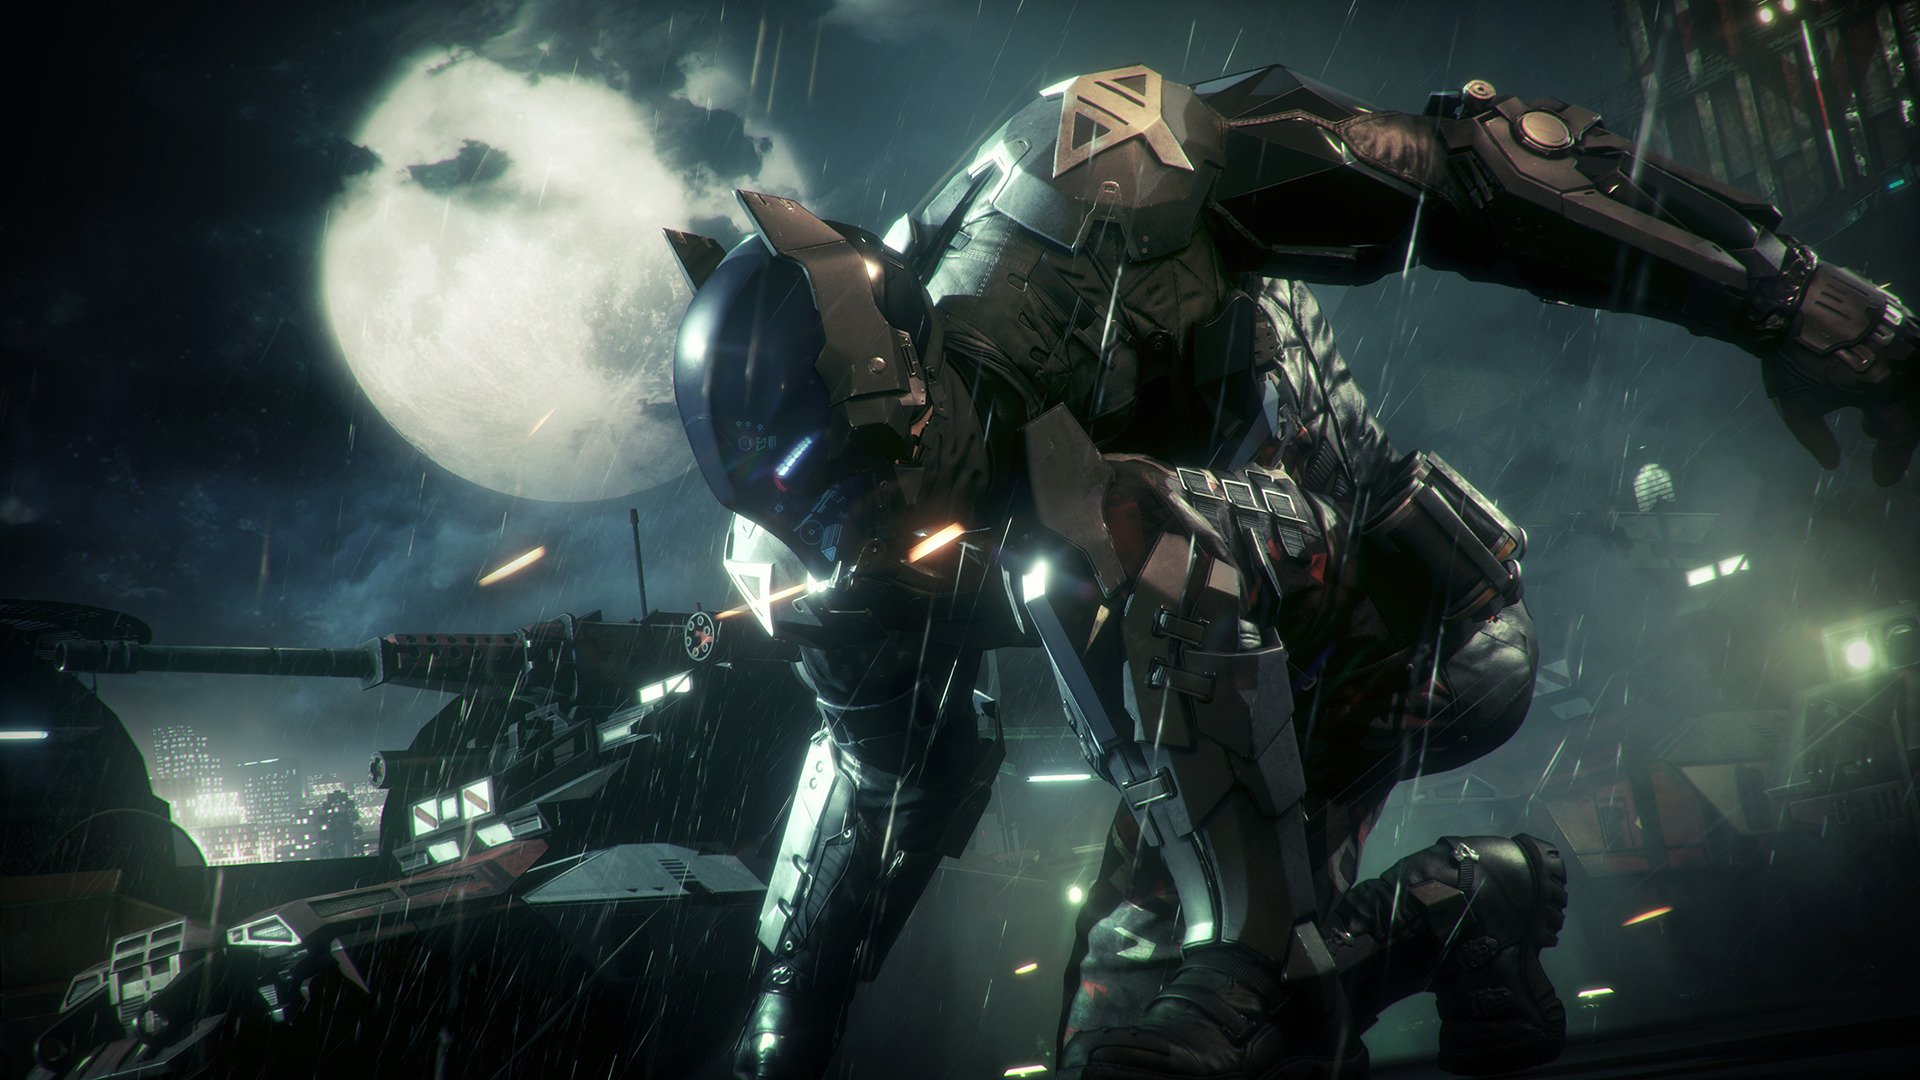 In Batman: Arkham Knight you can have the last laugh against this